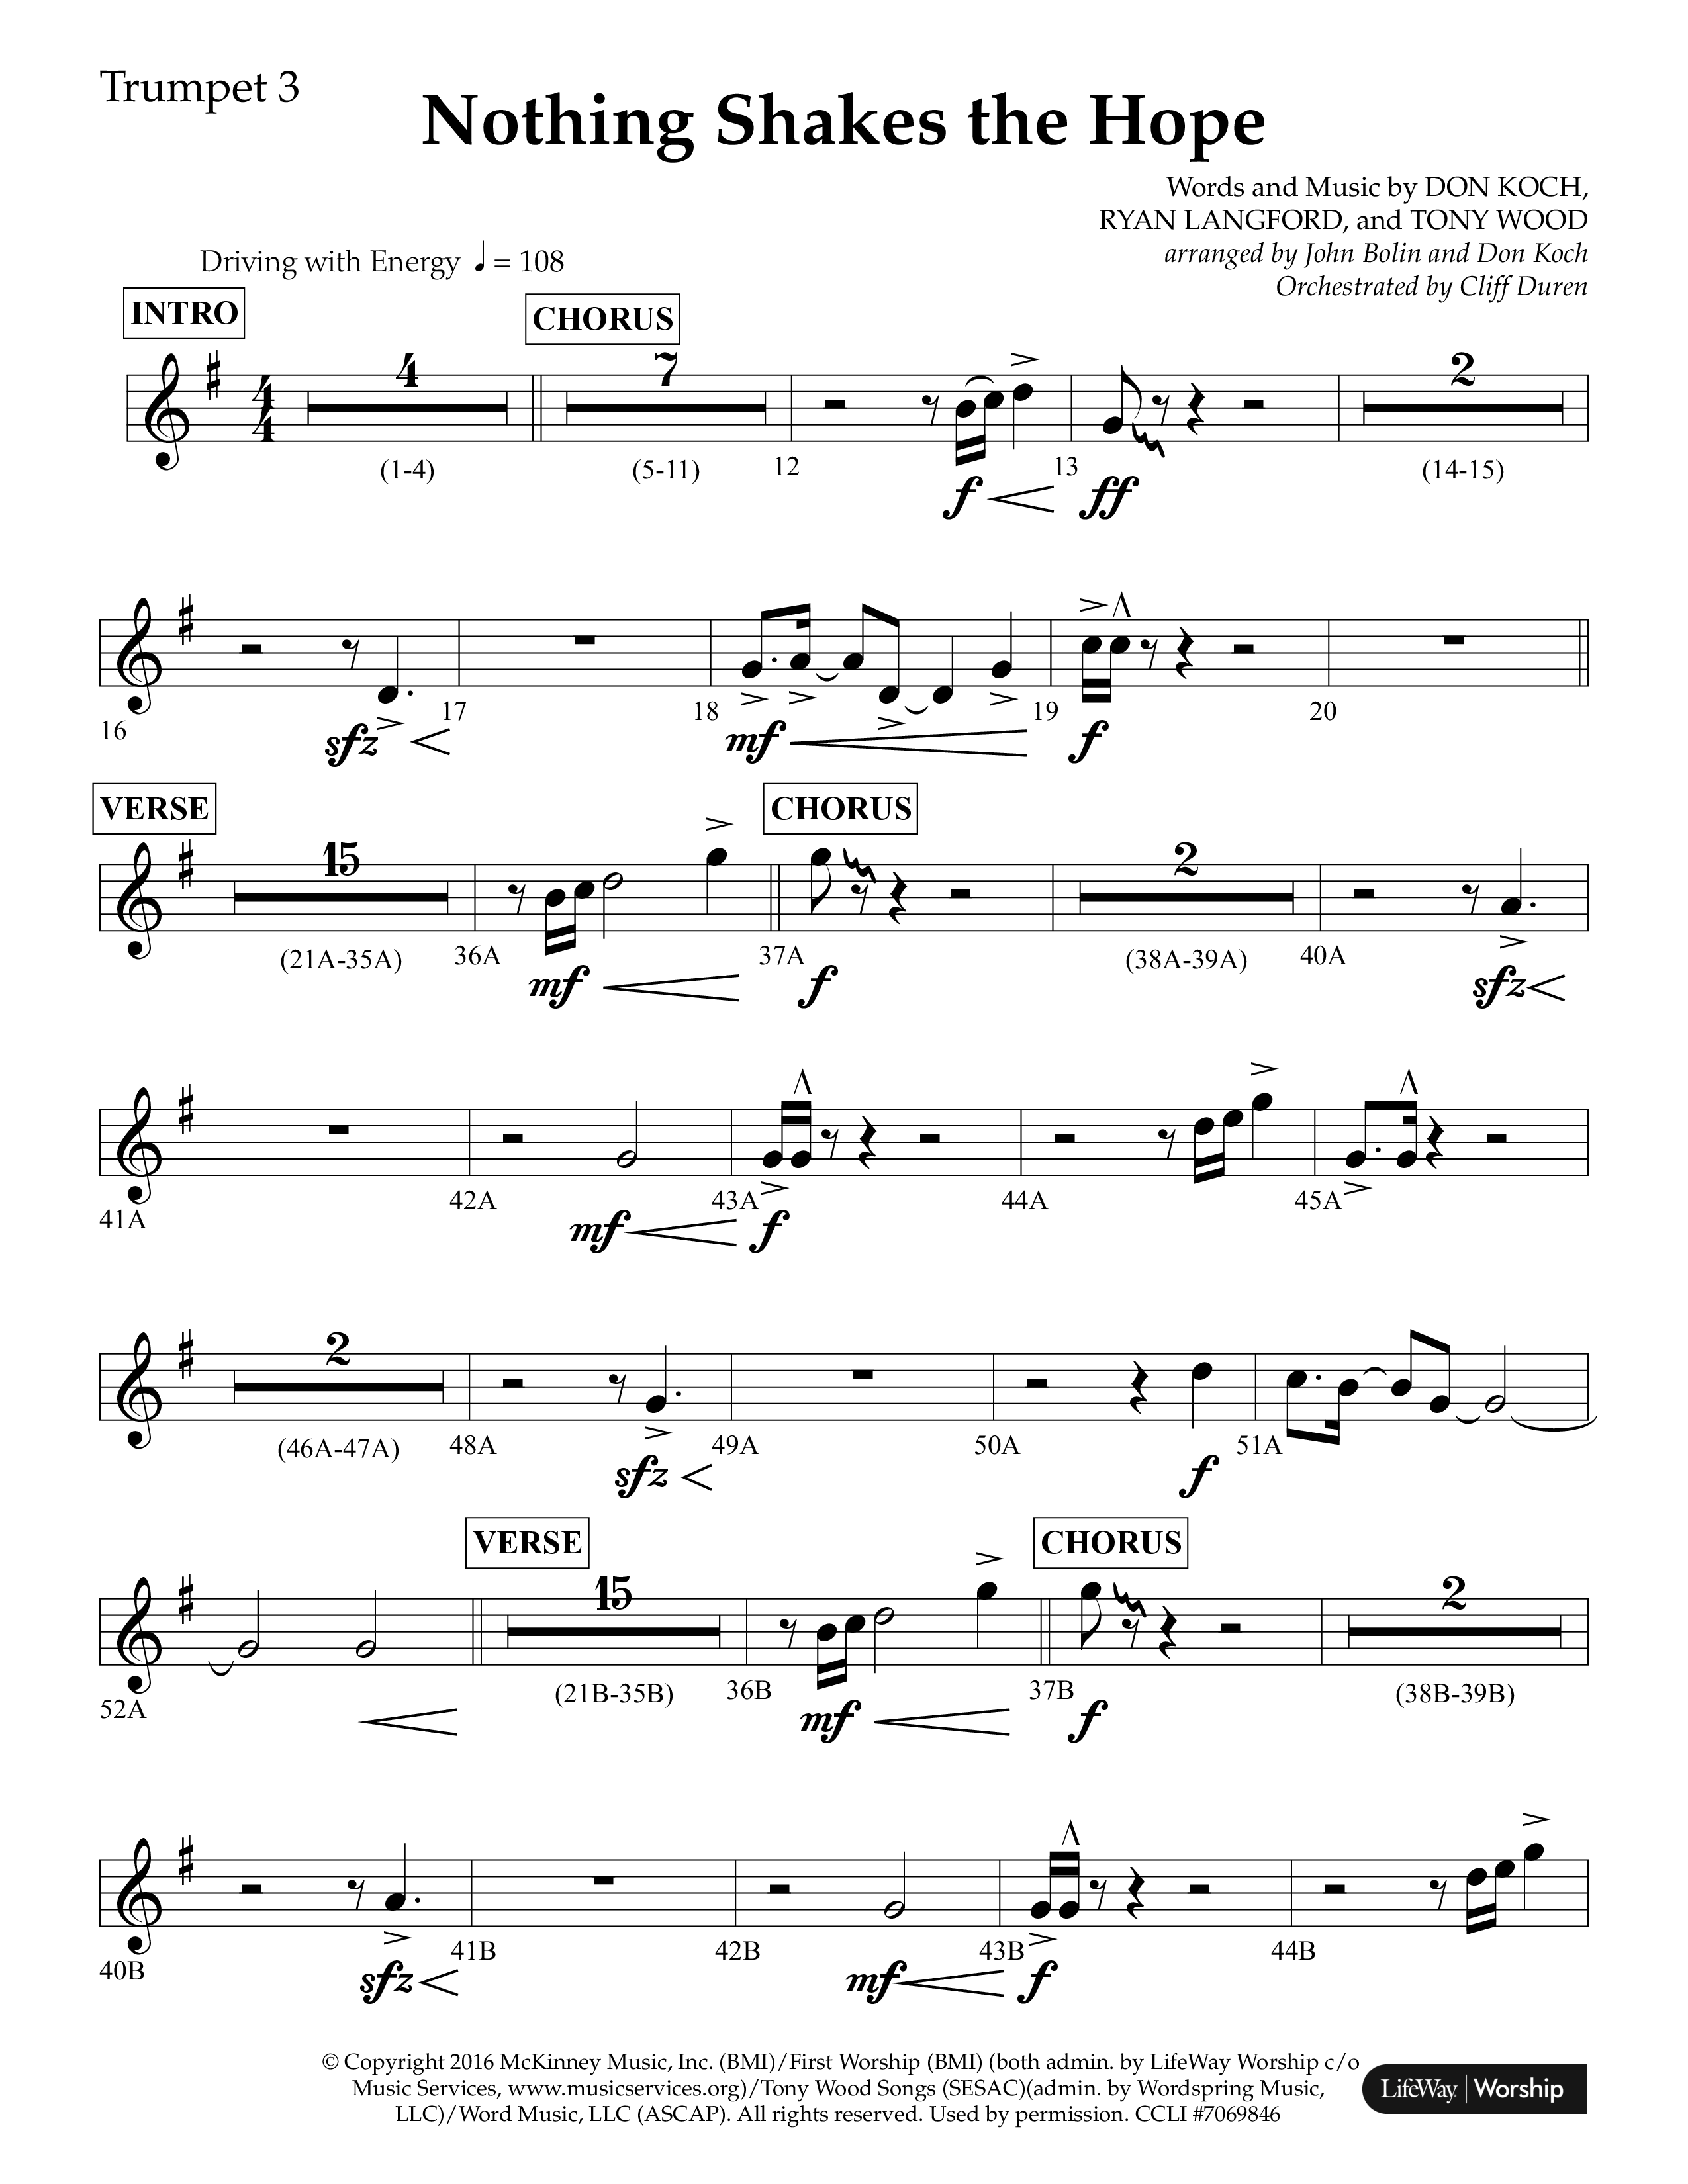 Nothing Shakes The Hope (Choral Anthem SATB) Trumpet 3 (Lifeway Choral / Arr. John Bolin / Arr. Don Koch / Orch. Cliff Duren)